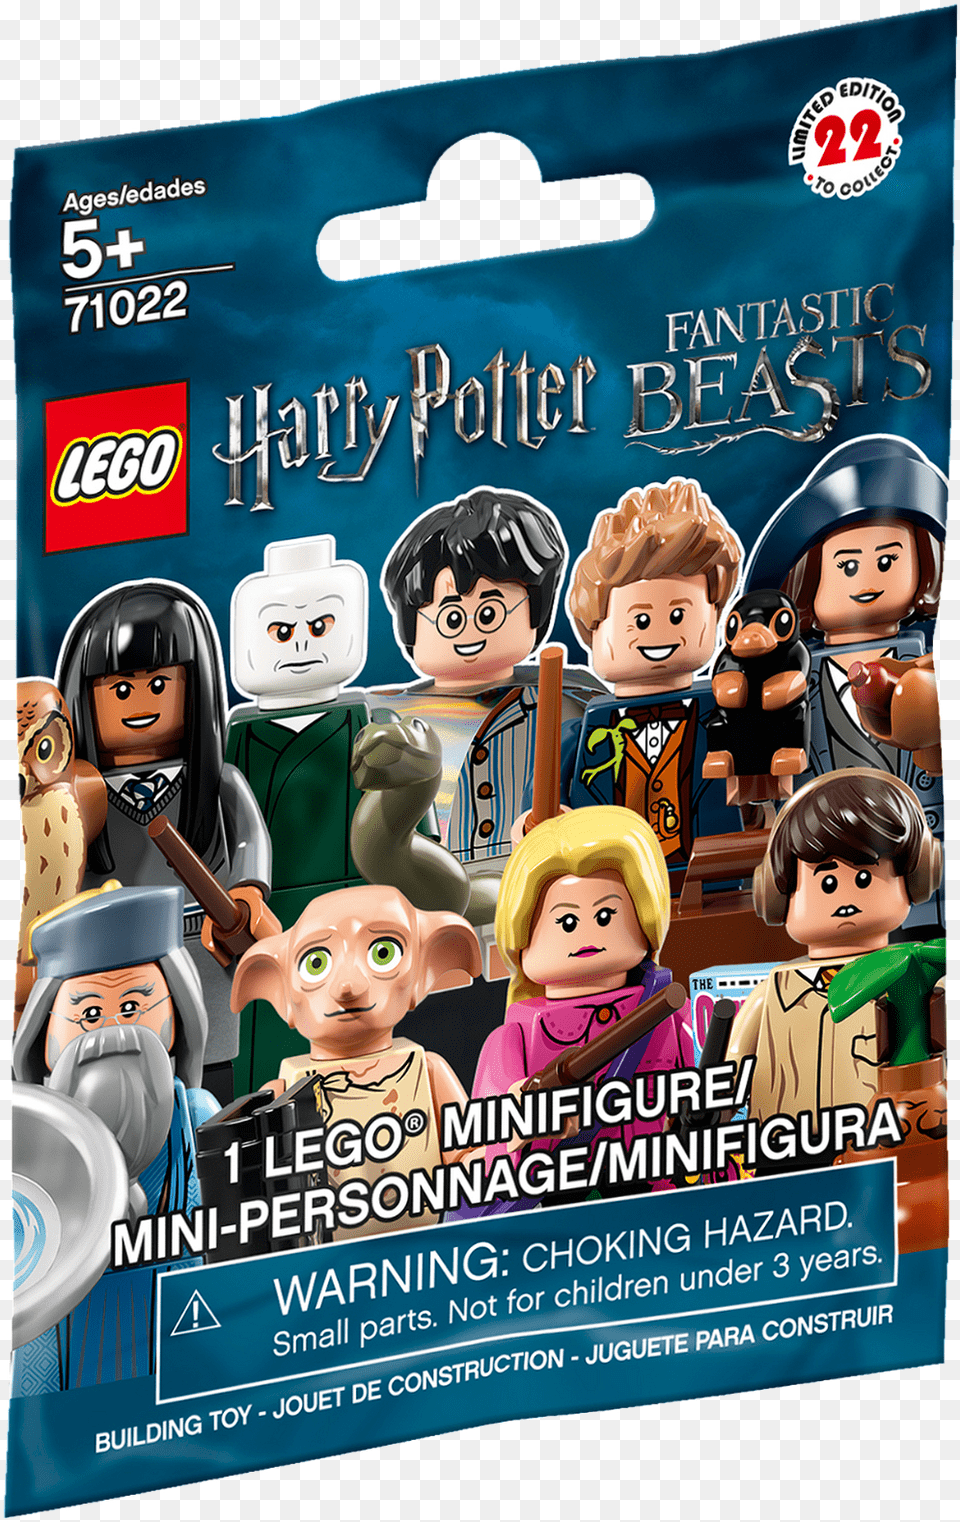 Lego Harry Potter Minifigures Series Bags, Advertisement, Doll, Toy, Poster Png